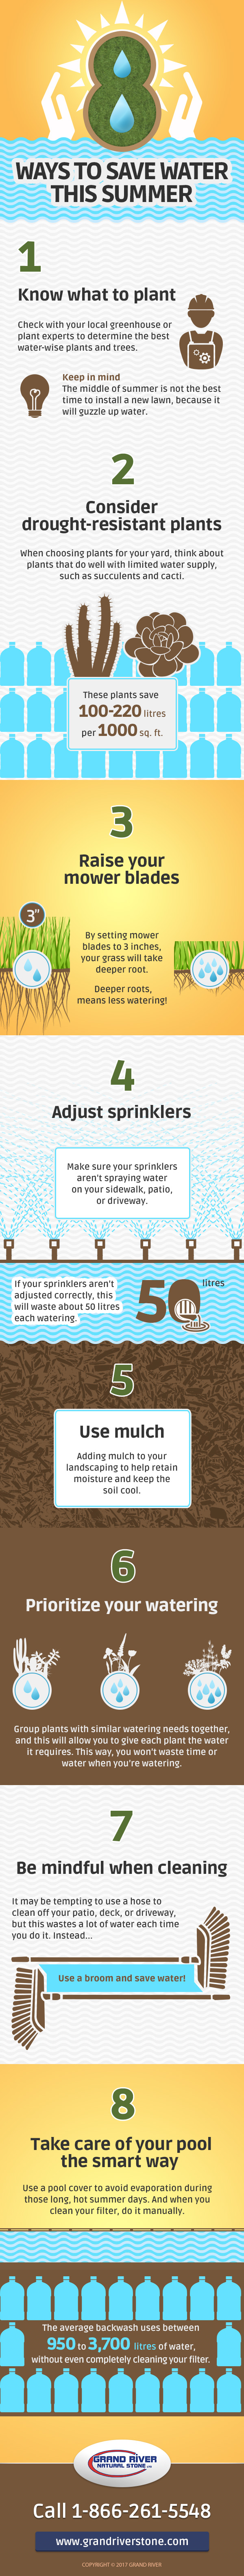 Ways to Conserve Water at Home for Summer